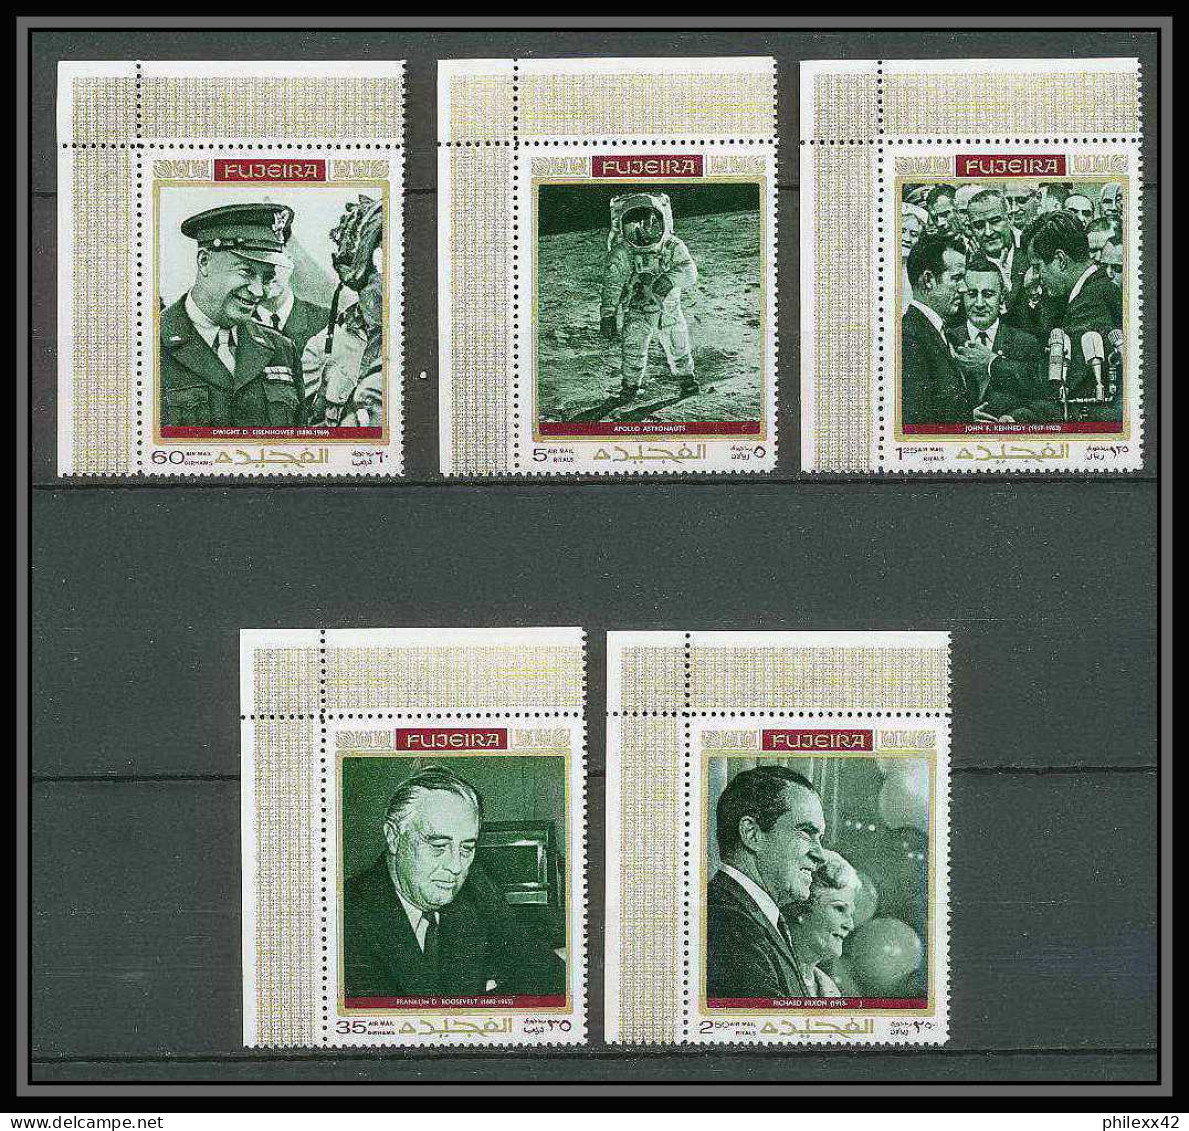 364 Fujeira MNH ** Mi N° 485 / 494 A Personalities From American History Espace (space) Kennedy Armstrong Lincoln Nixon - Indépendance USA